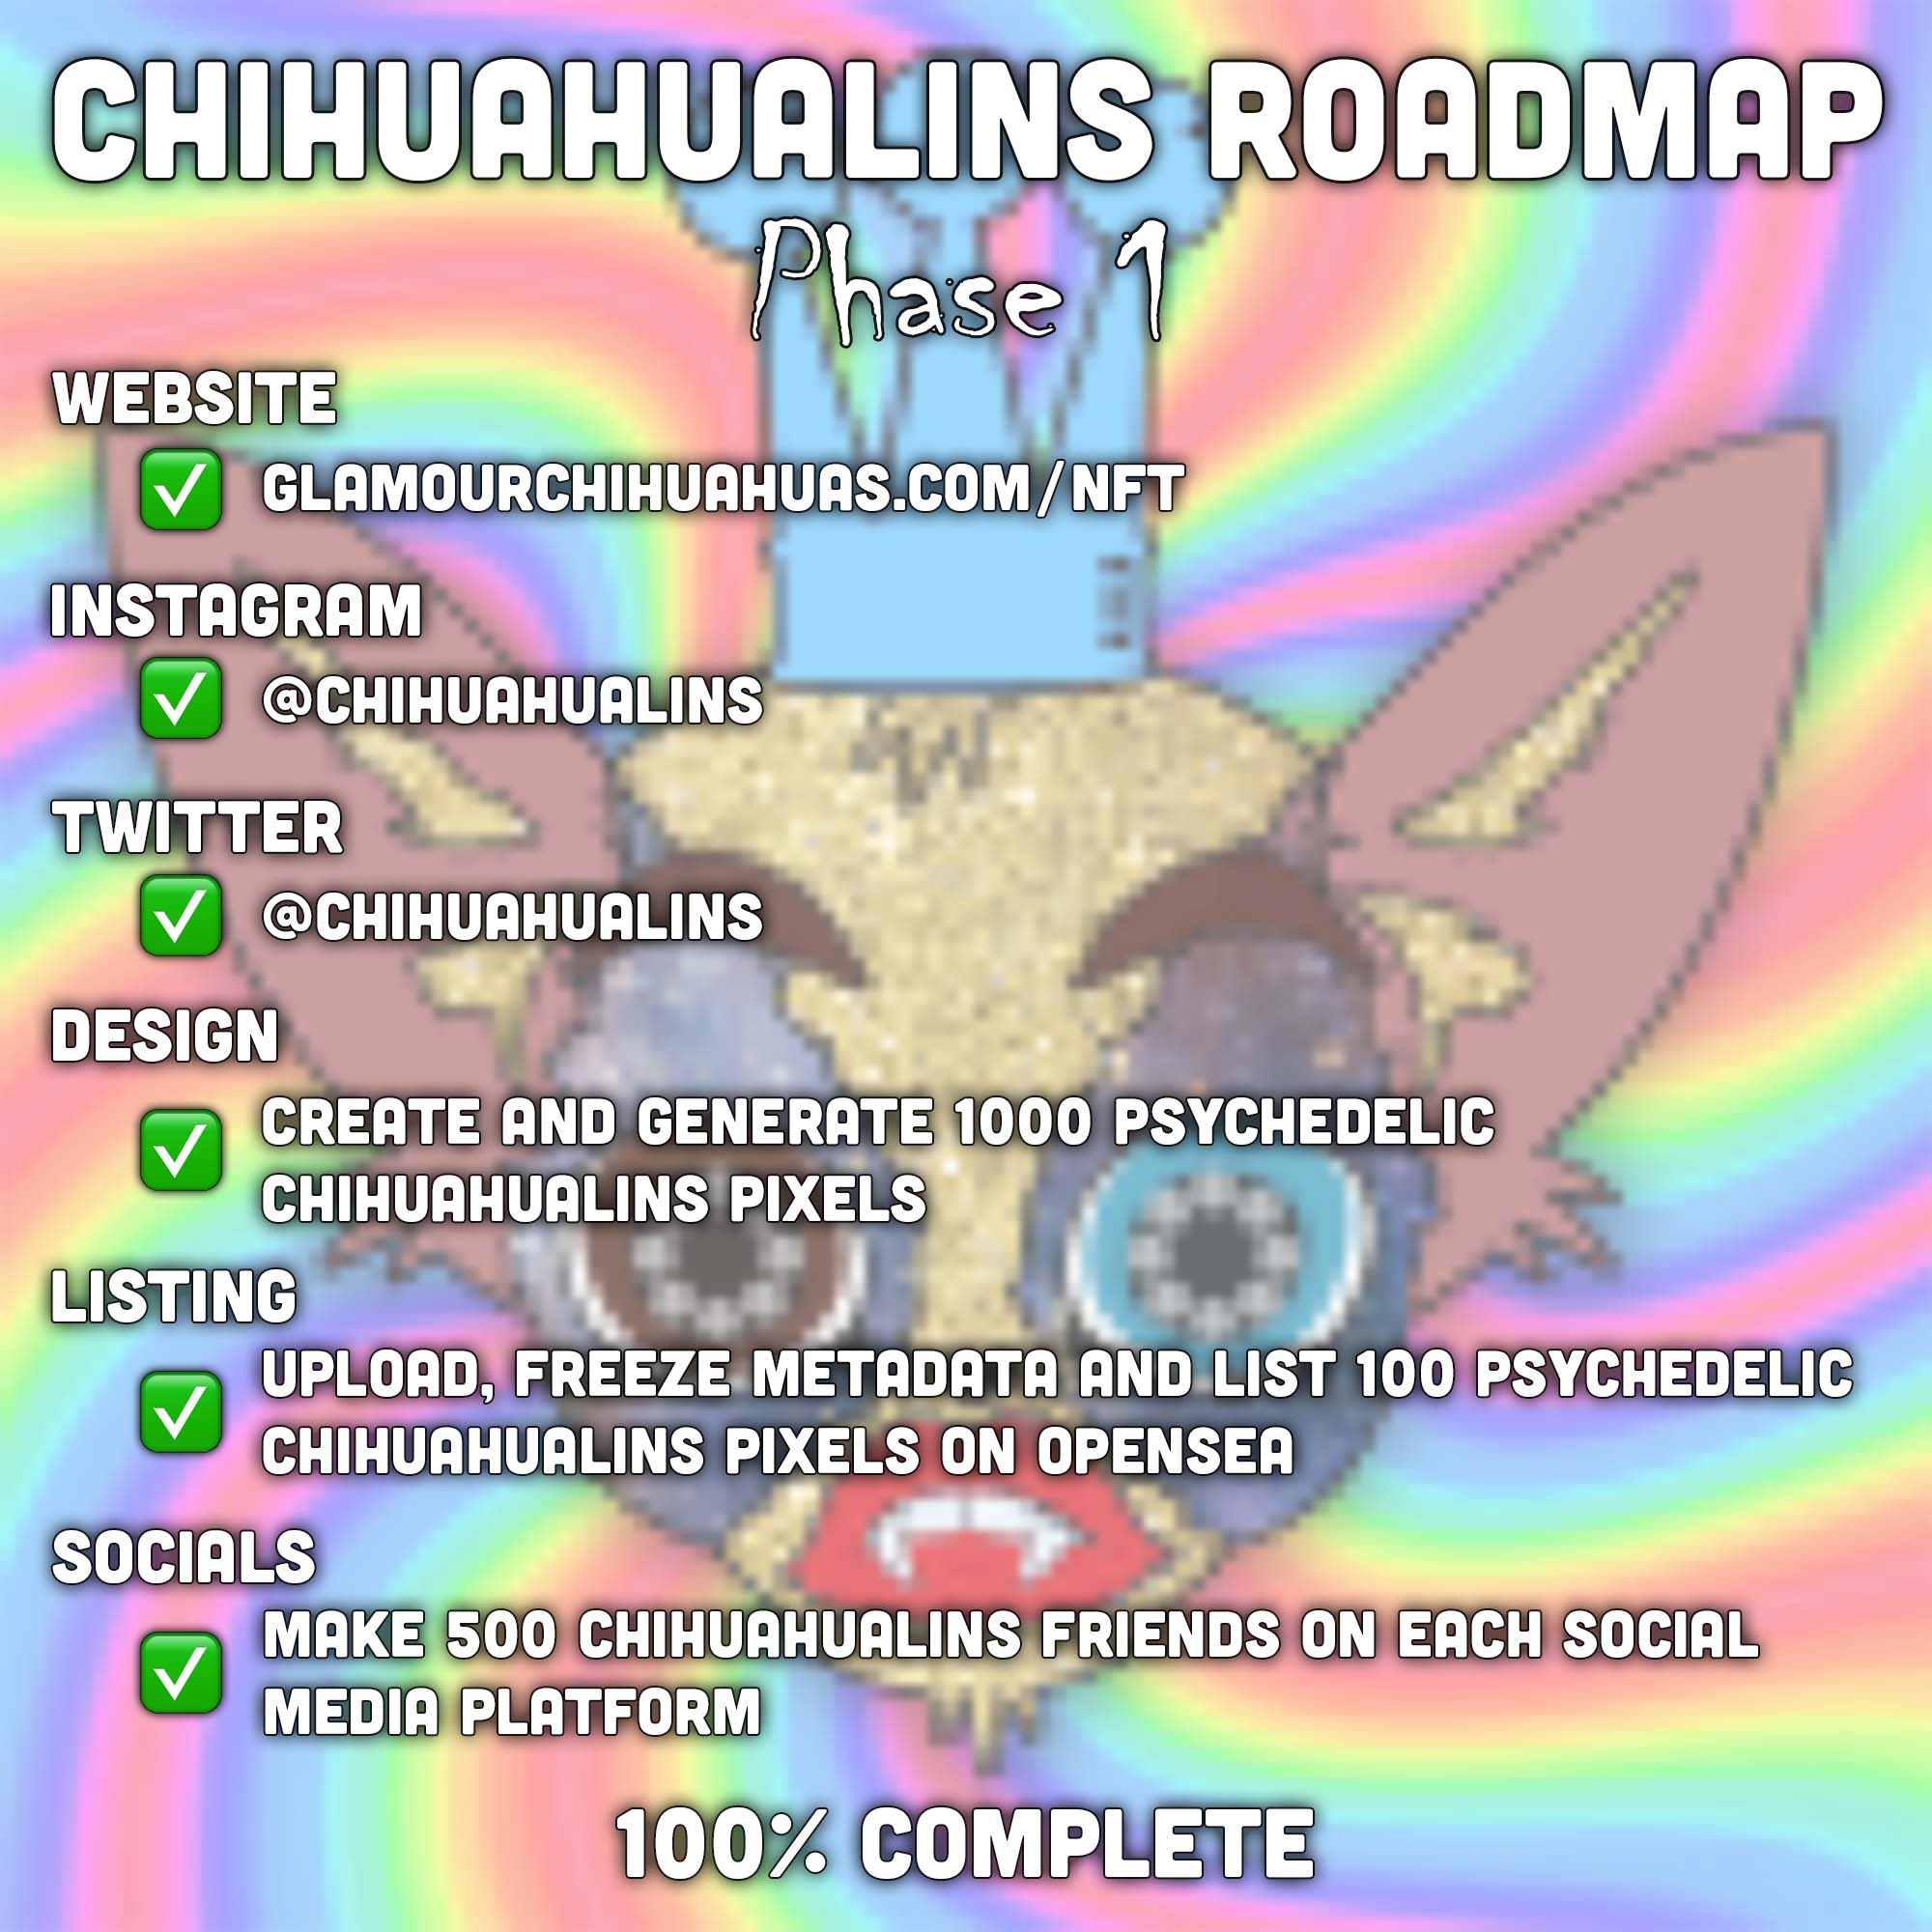 Chihuahualins NFT Roadmap Phase 1